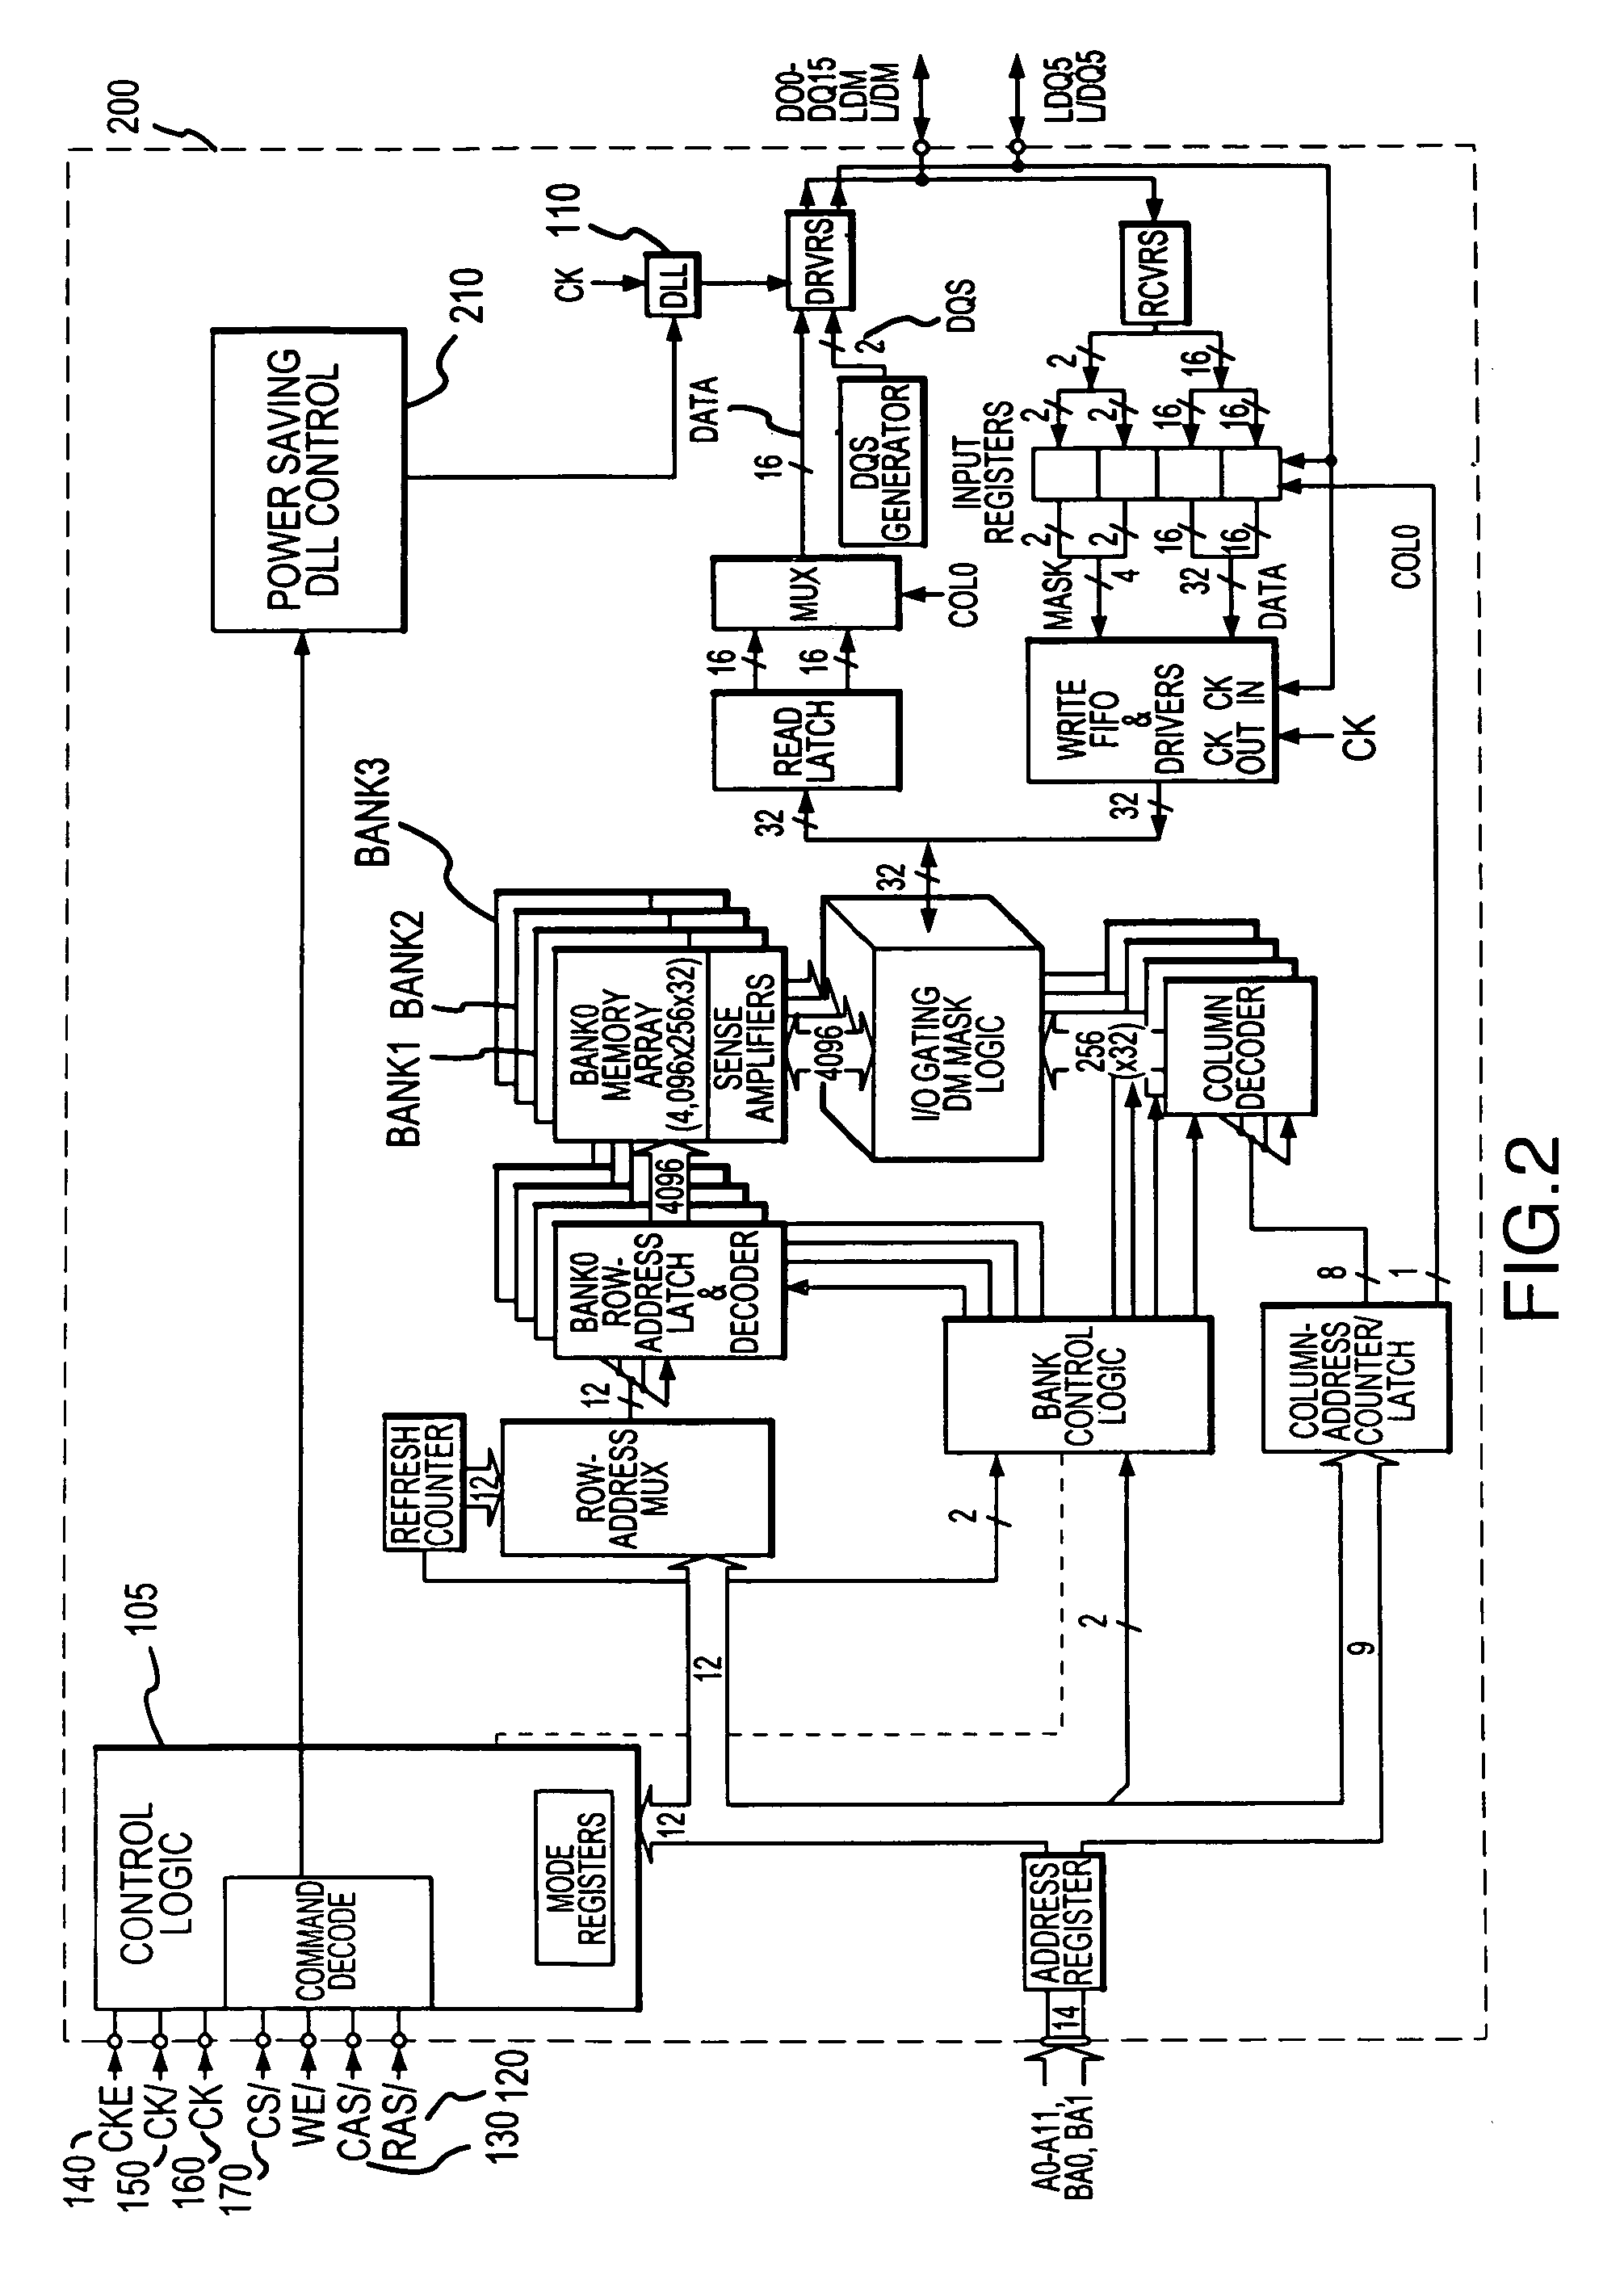 System and method for power saving delay locked loop control by selectively locking delay interval